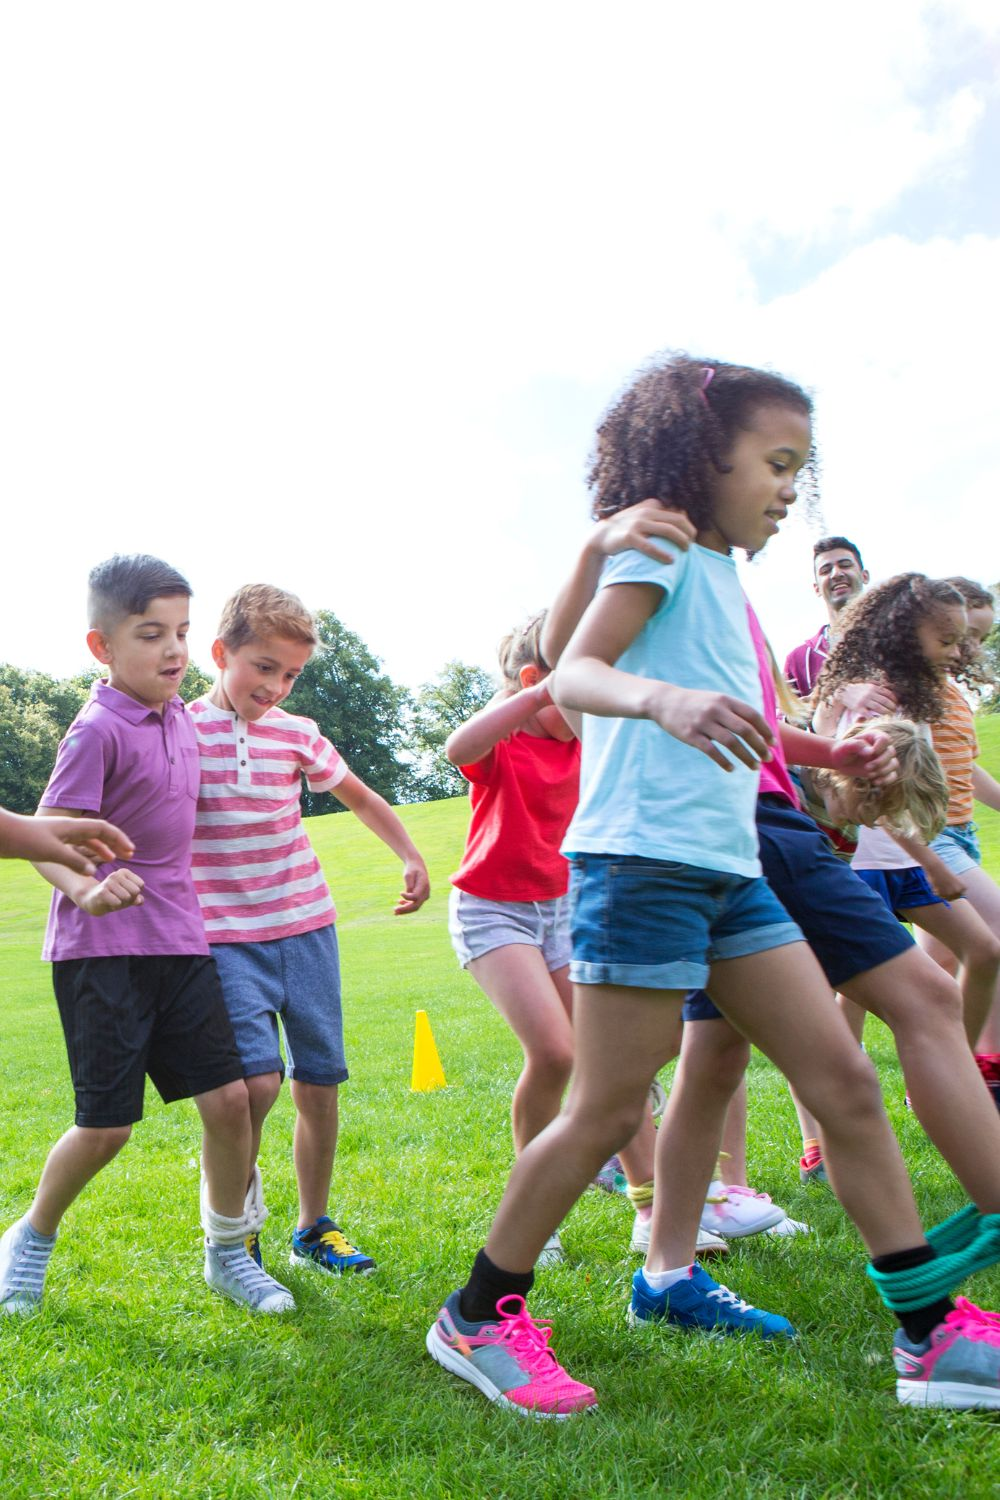 Three-legged race - Featured In Kids Party Games